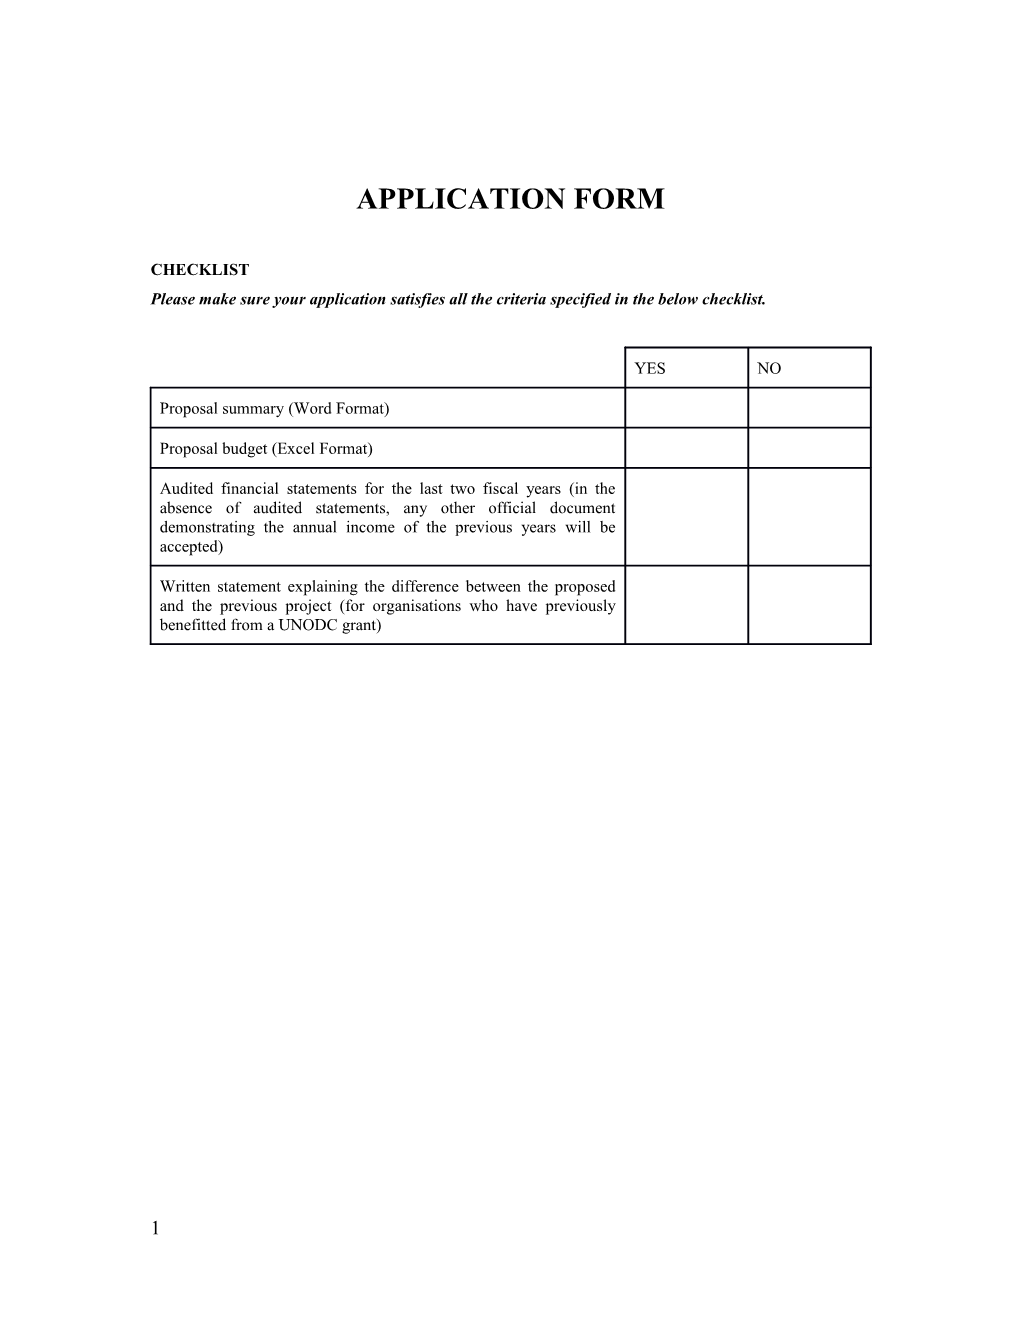 Please Make Sure Your Application Satisfies All the Criteria Specified in the Below Checklist